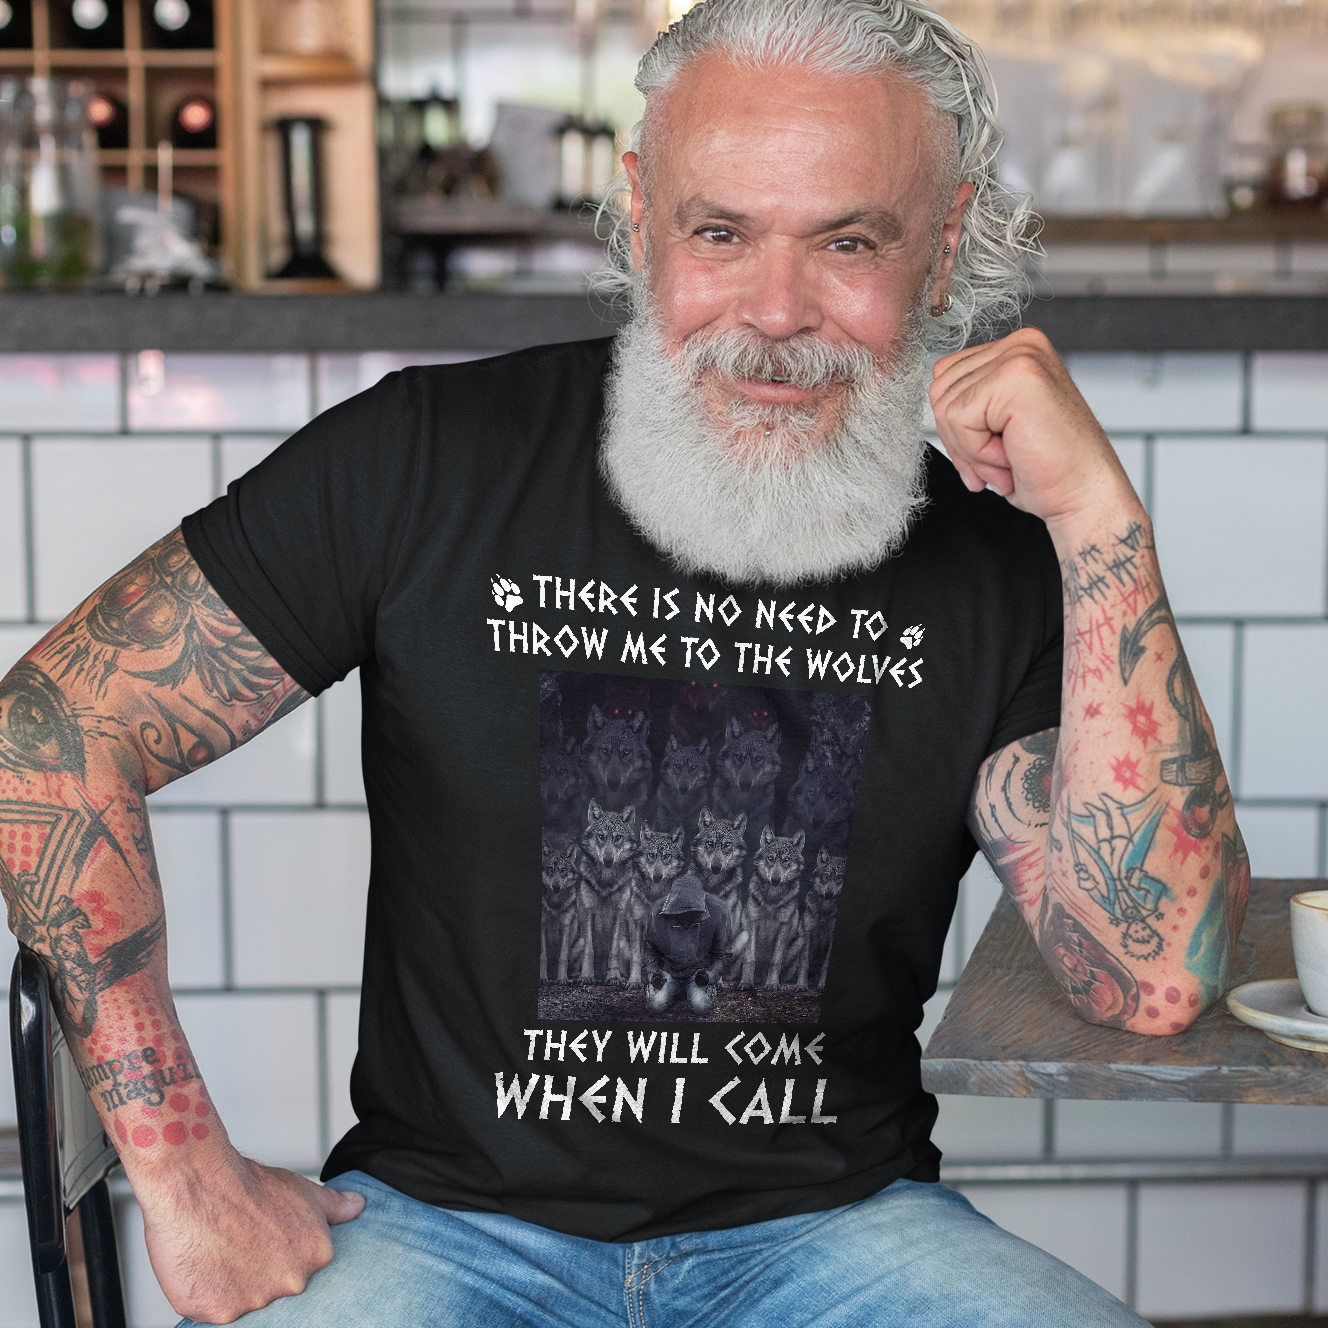 Wolves Come When I Call Viking T Shirt